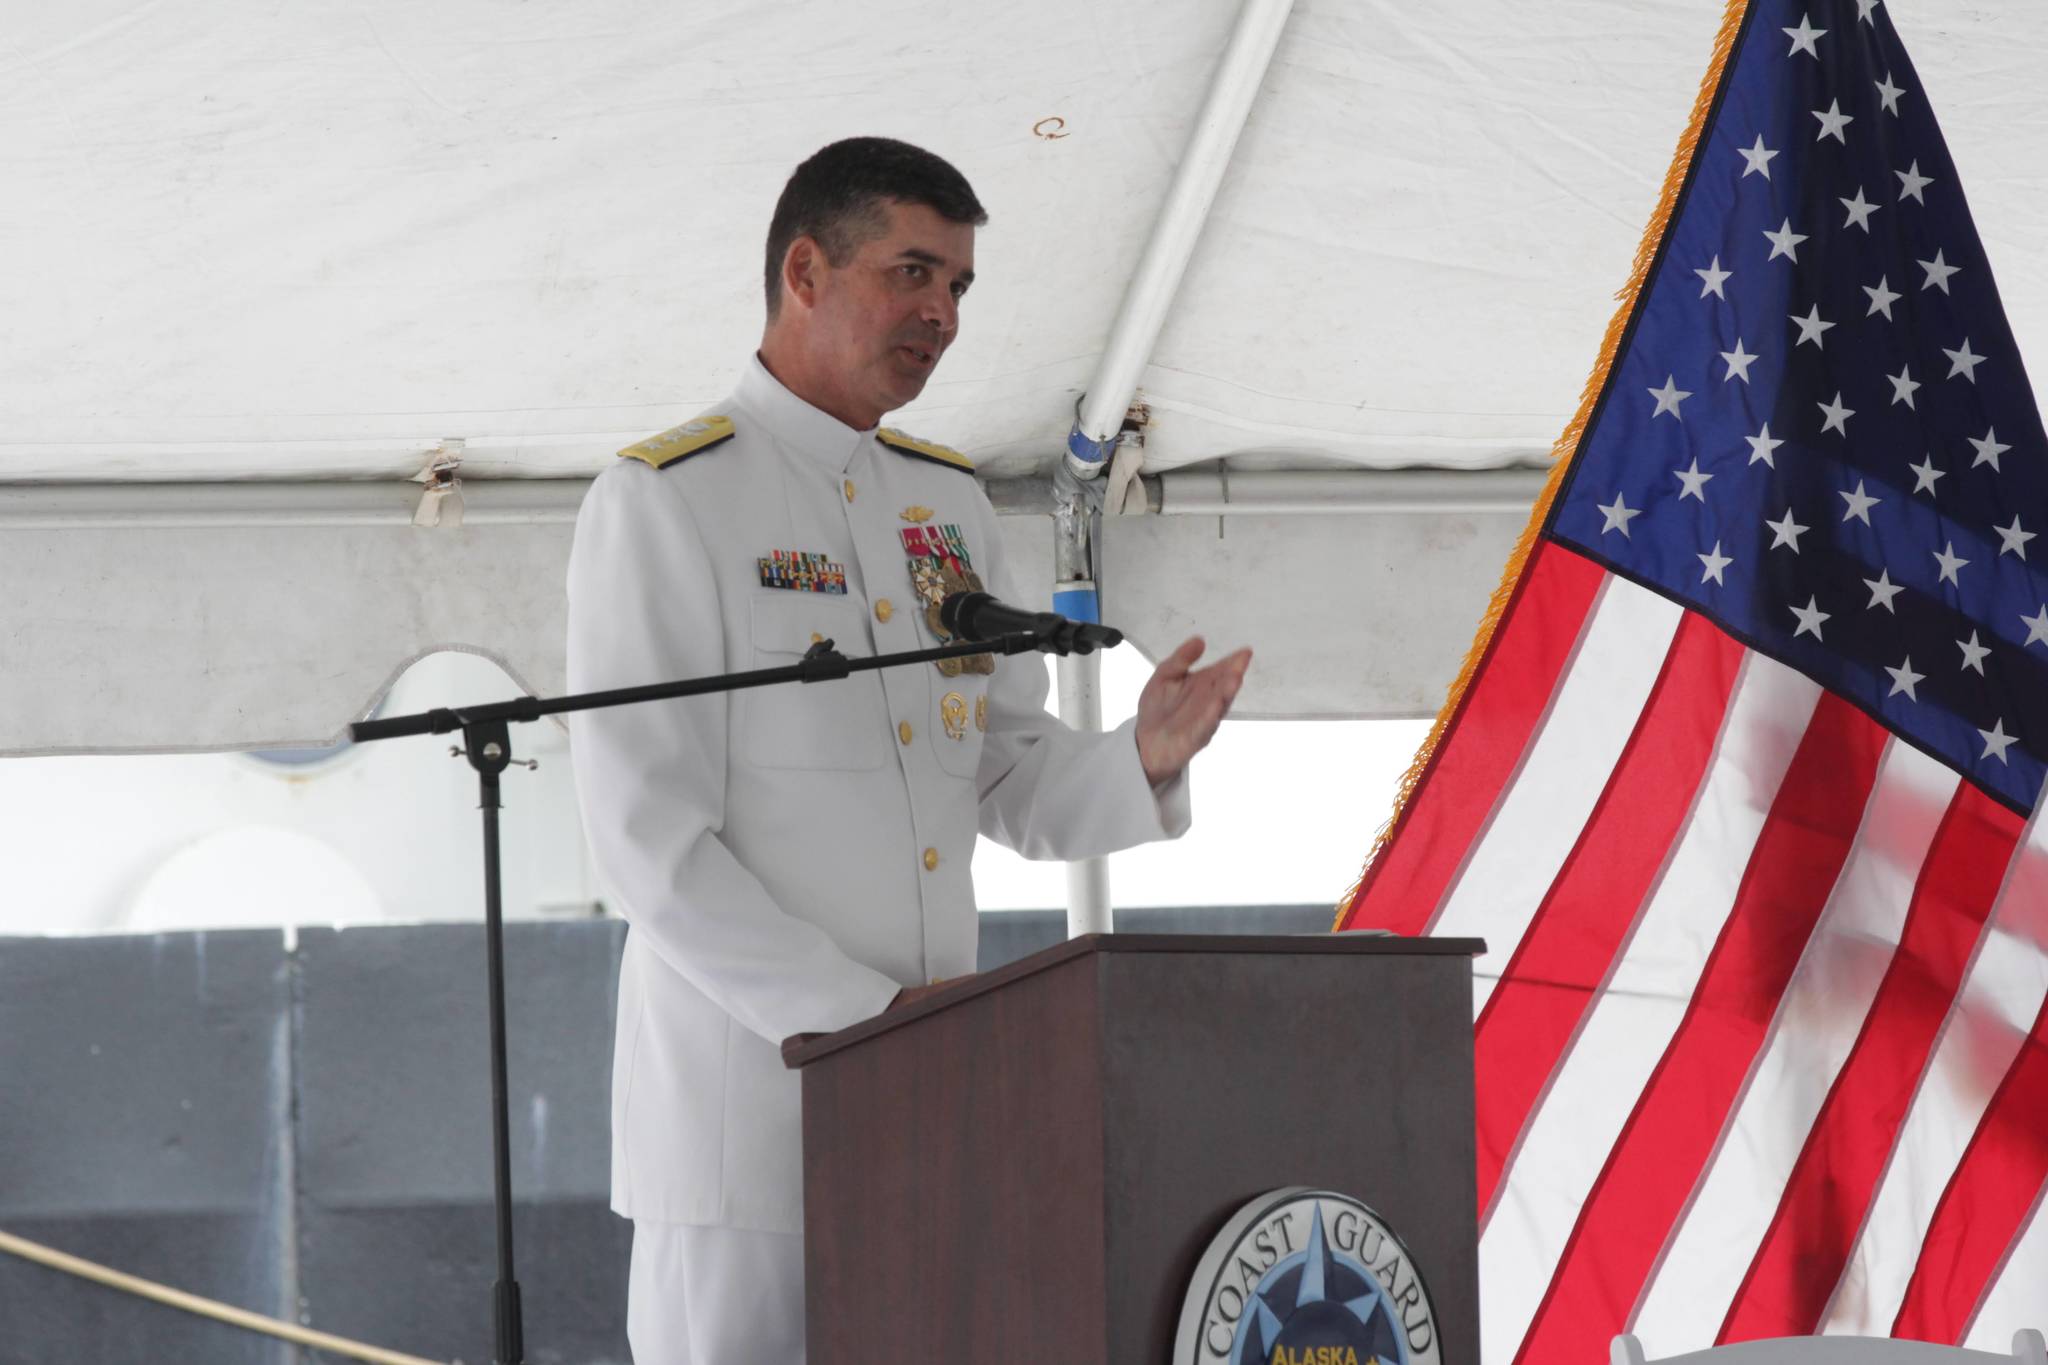 Rear Adm. Nathan A. Moore, Coast Guard District 17 commander, speaks during a change of command ceremony for Sector Juneau at the station on July 7, 2021. (Michael S. Lockett / Juneau Empire)